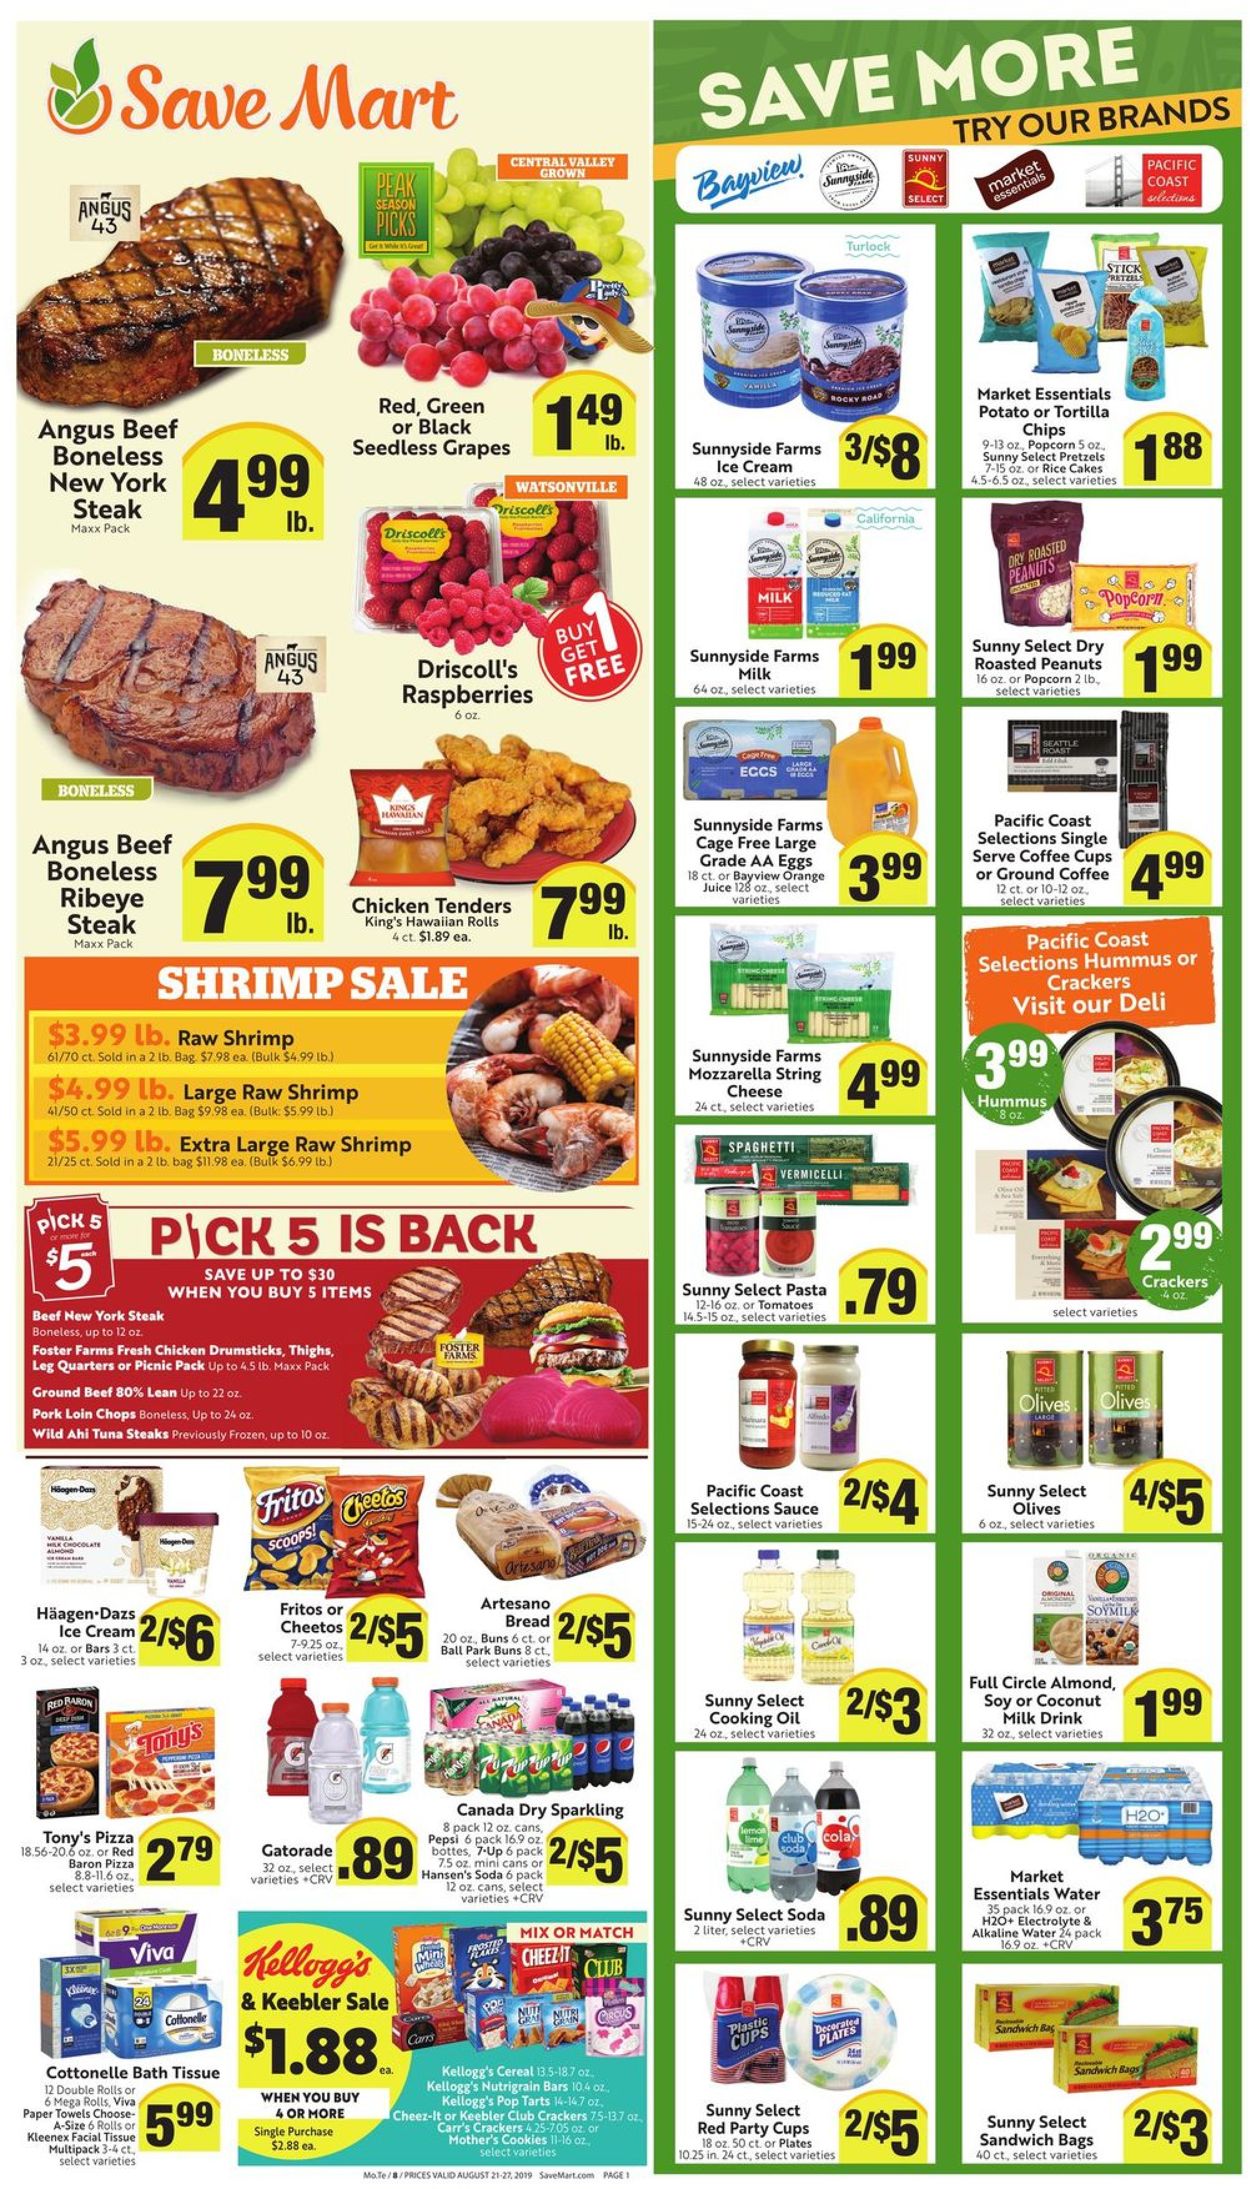 Save Mart Current weekly ad 08/21 - 08/27/2019 - frequent-ads.com